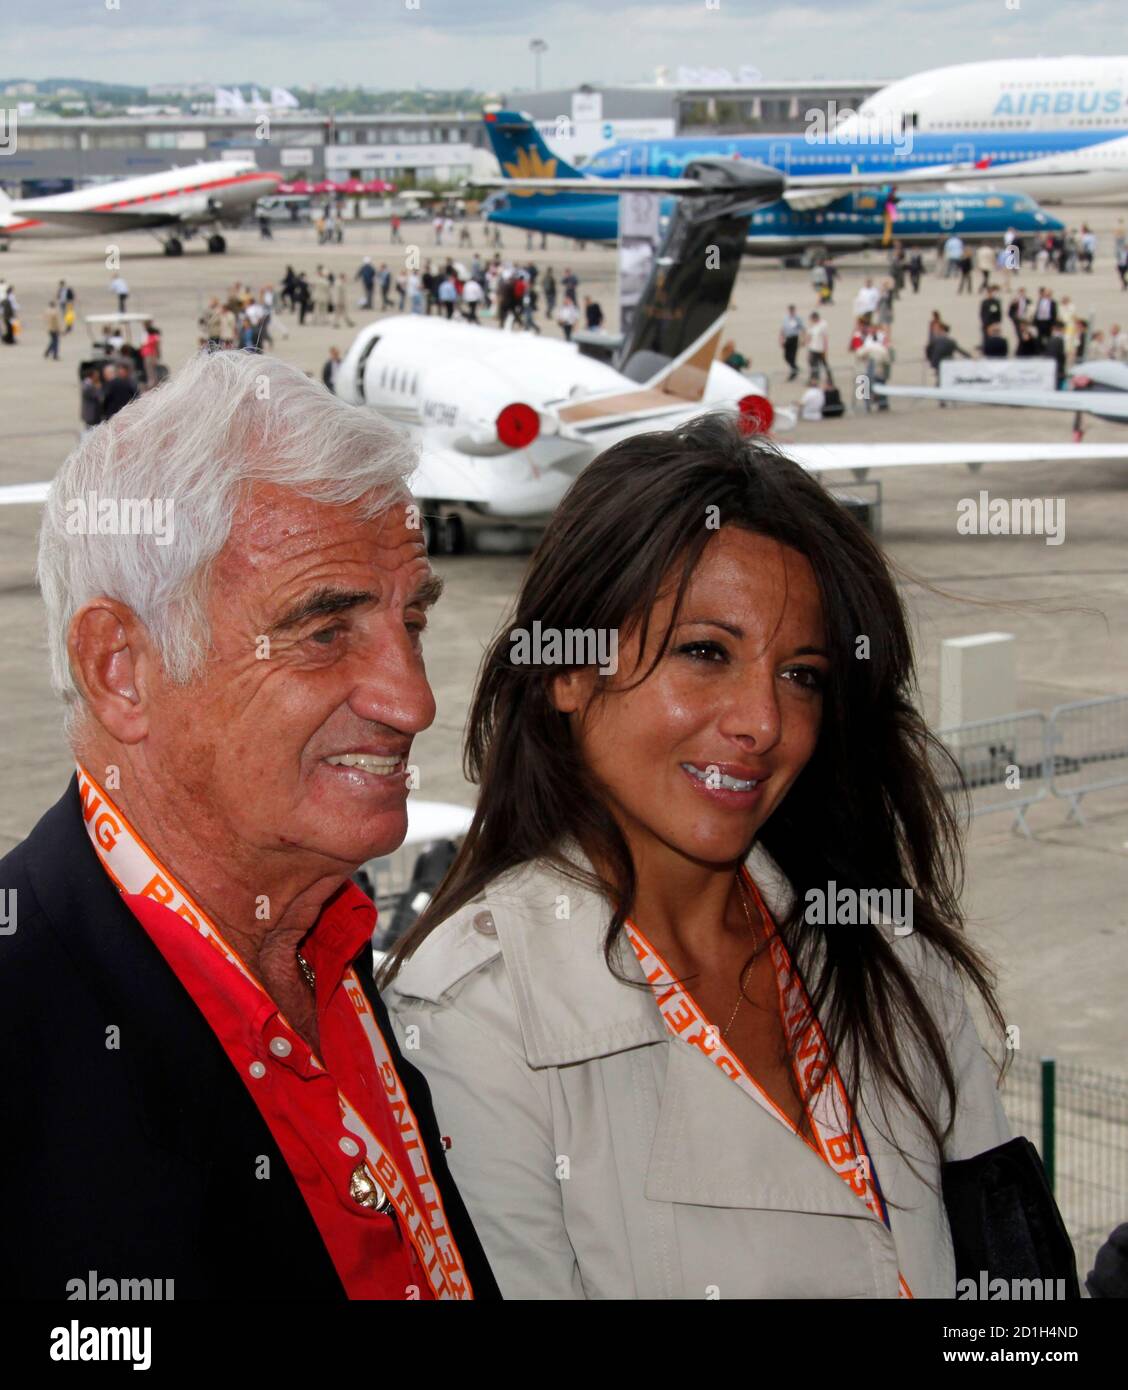 French actor Jean-Paul Belmondo (L) attends the 48th Paris Air Show at the  Le Bourget airport near Paris June 18, 2009. REUTERS/Pascal Rossignol  (FRANCE TRANSPORT BUSINESS ENTERTAINMENT Stock Photo - Alamy